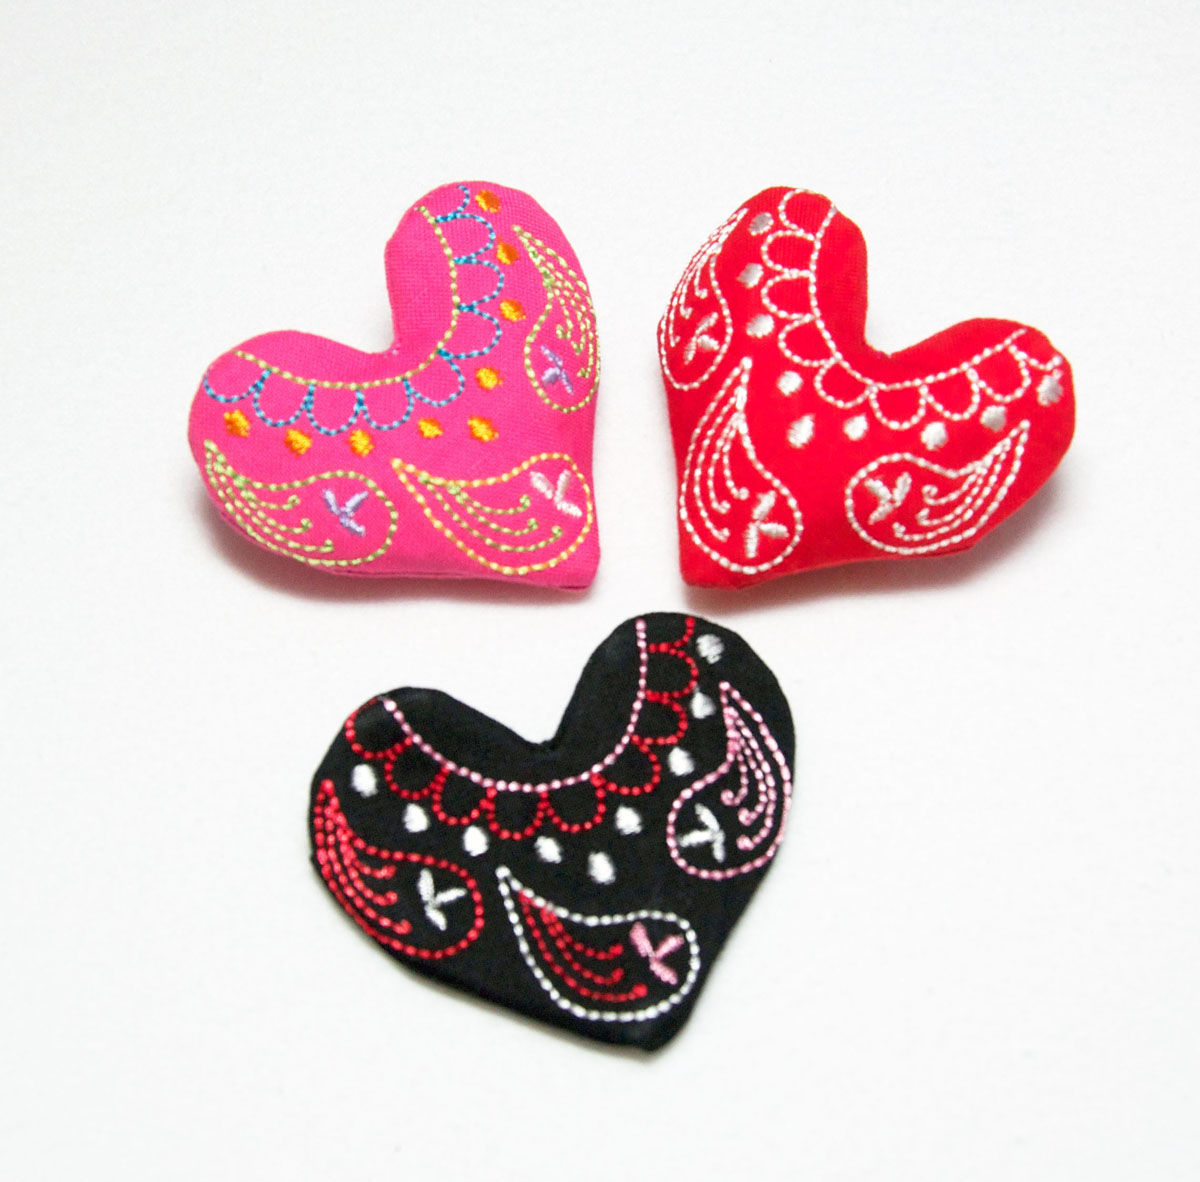 Make Embroidery Pattern Embroidered Heart Pin And Free Embroidery Design Weallsew